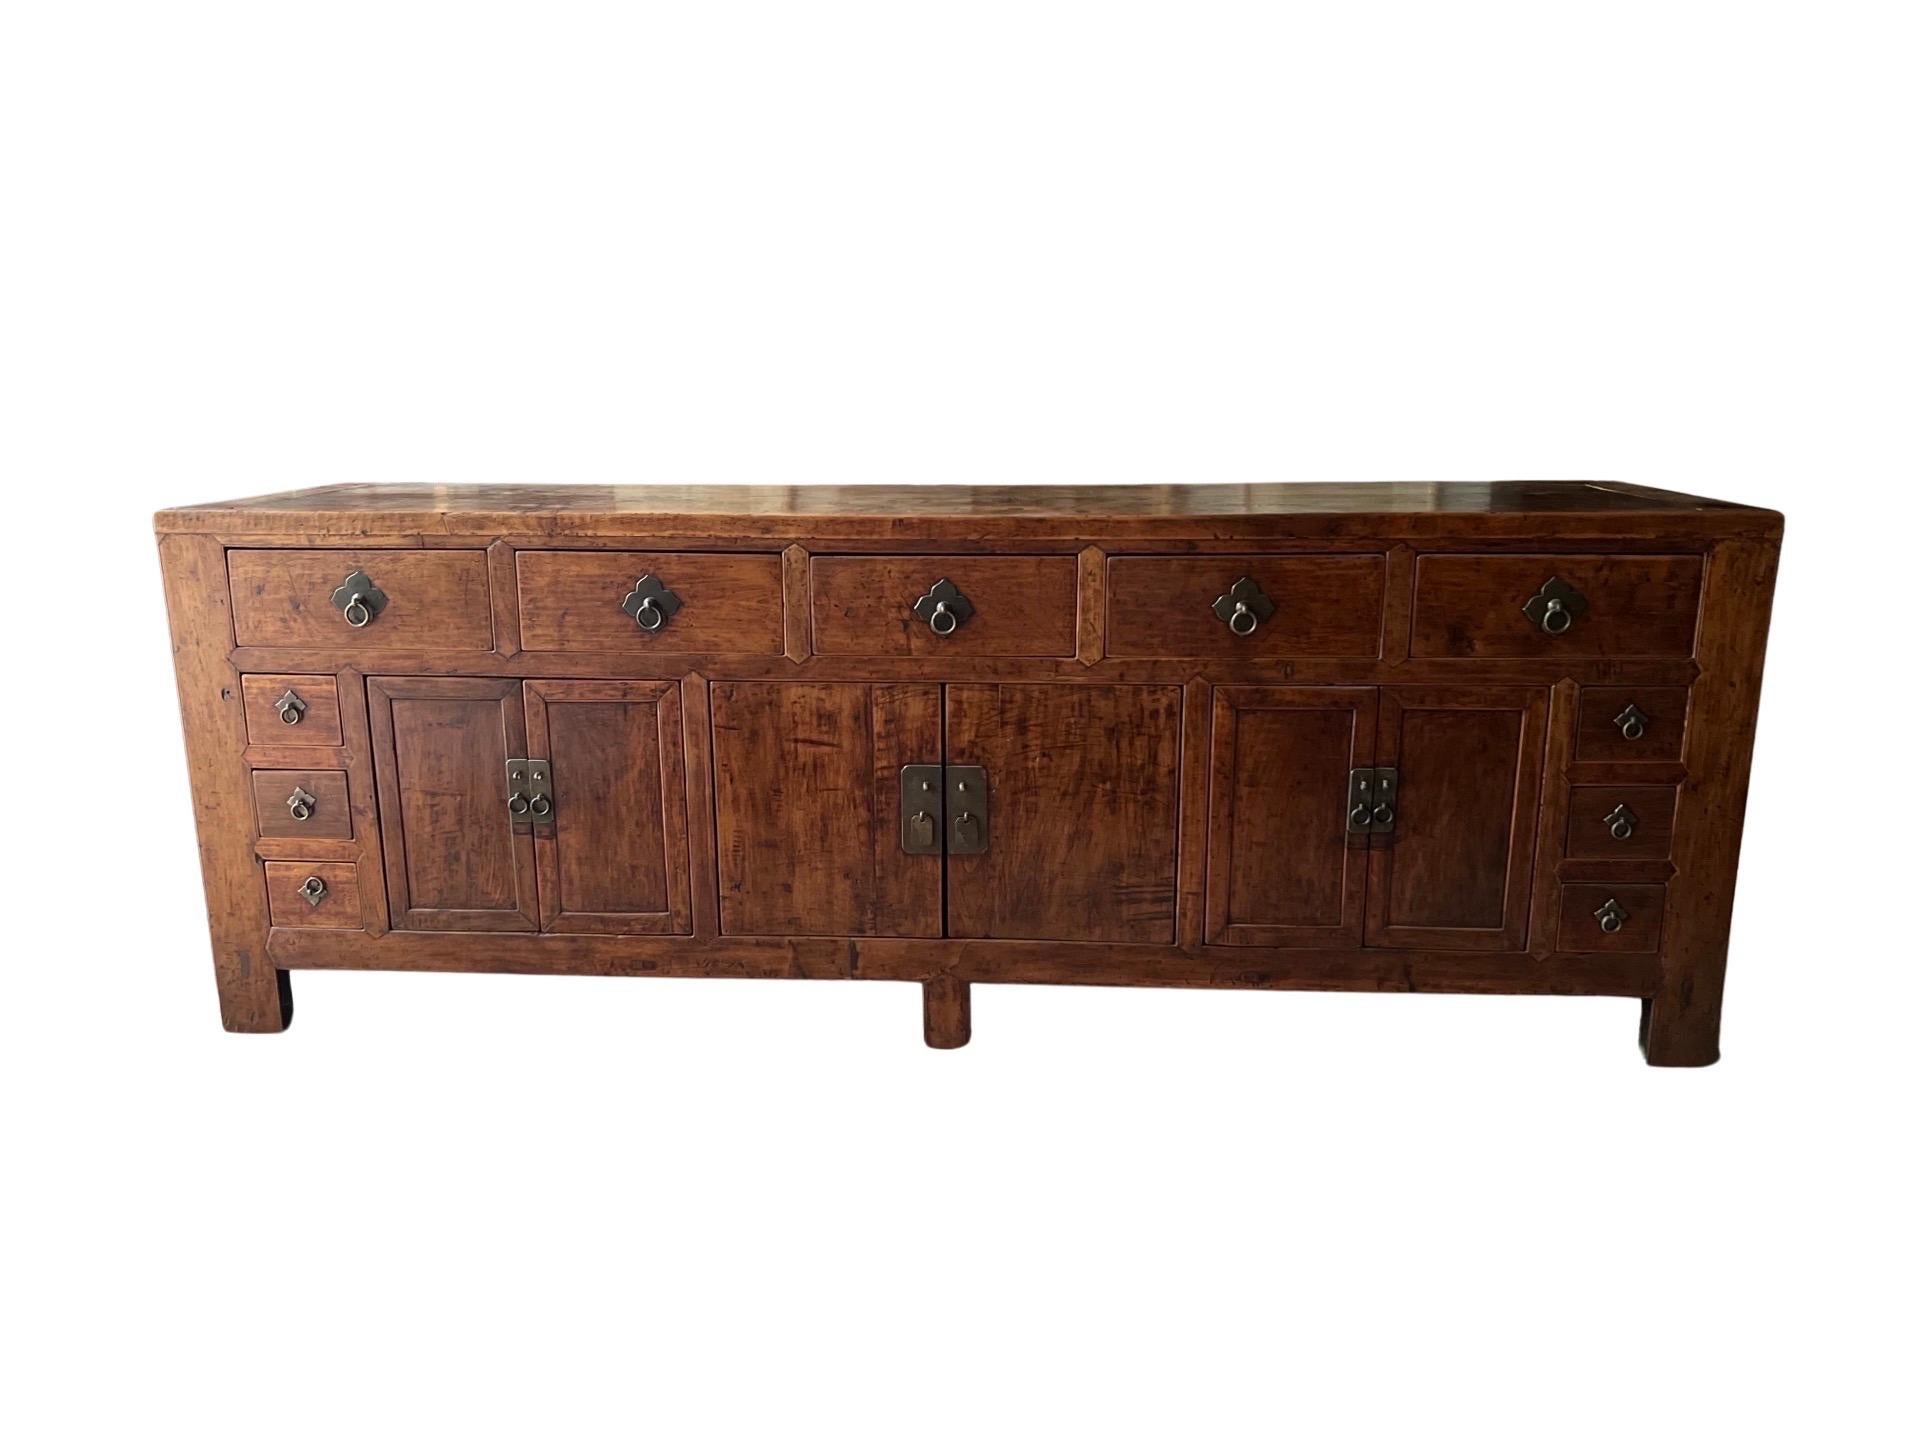 Chinese Origin, 19th century or earlier. 

An exceptional 19th century or earlier Qing Dynasty wooden buffet or sideboard likely made in possibly rosewood or elmwood. This piece is extremely heavy and features not only 5 frieze drawers to the upper